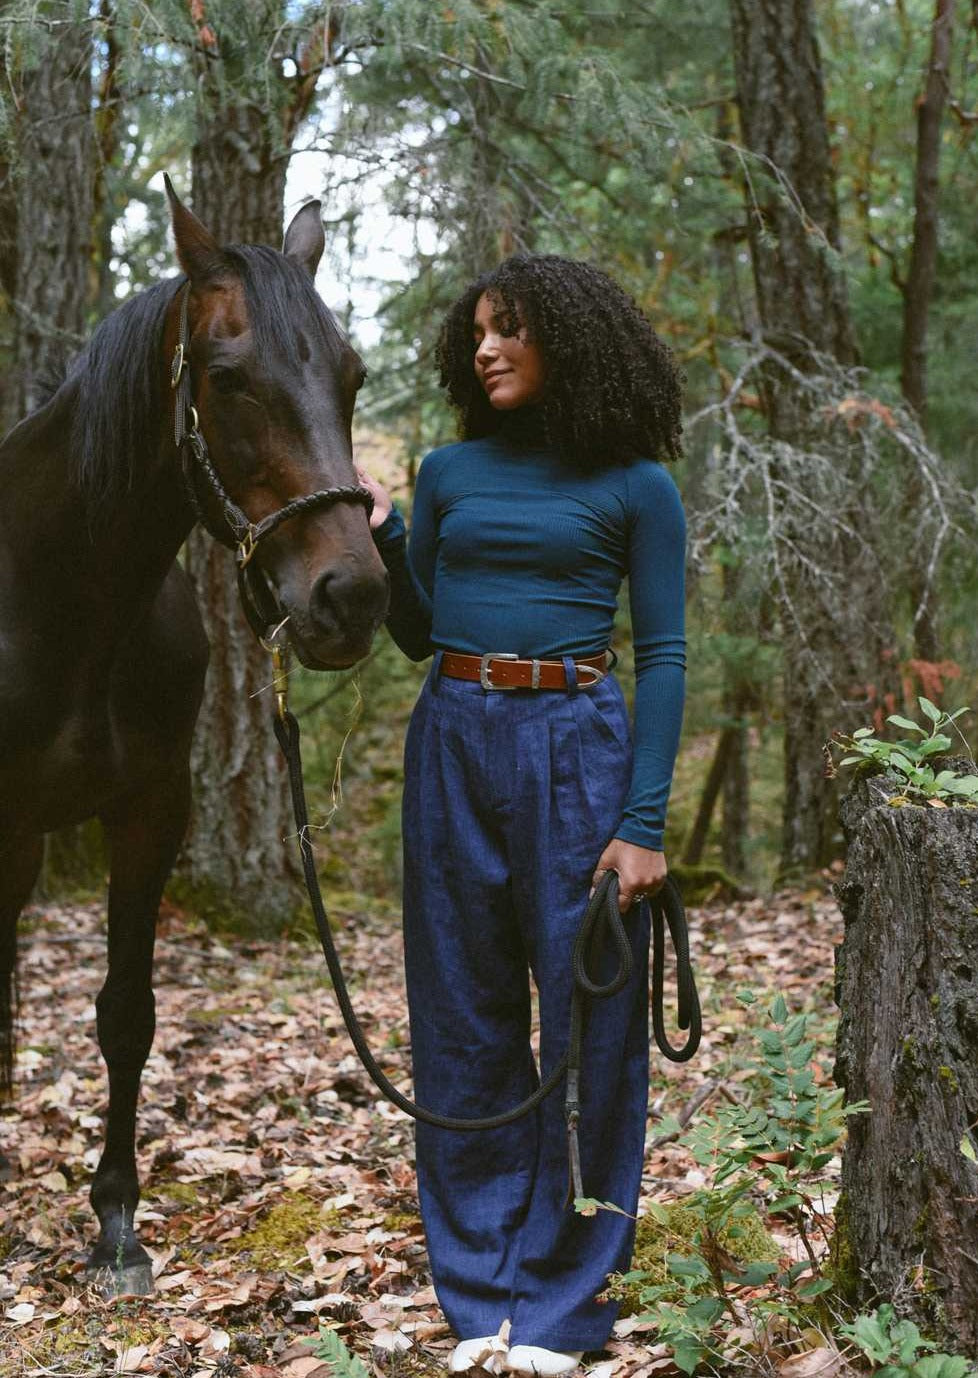 Hickstead Trouser | Chambray Wide Leg High Rise Pleated Pant, Street_and_Saddle, local_plus_size_inclusive_ethical